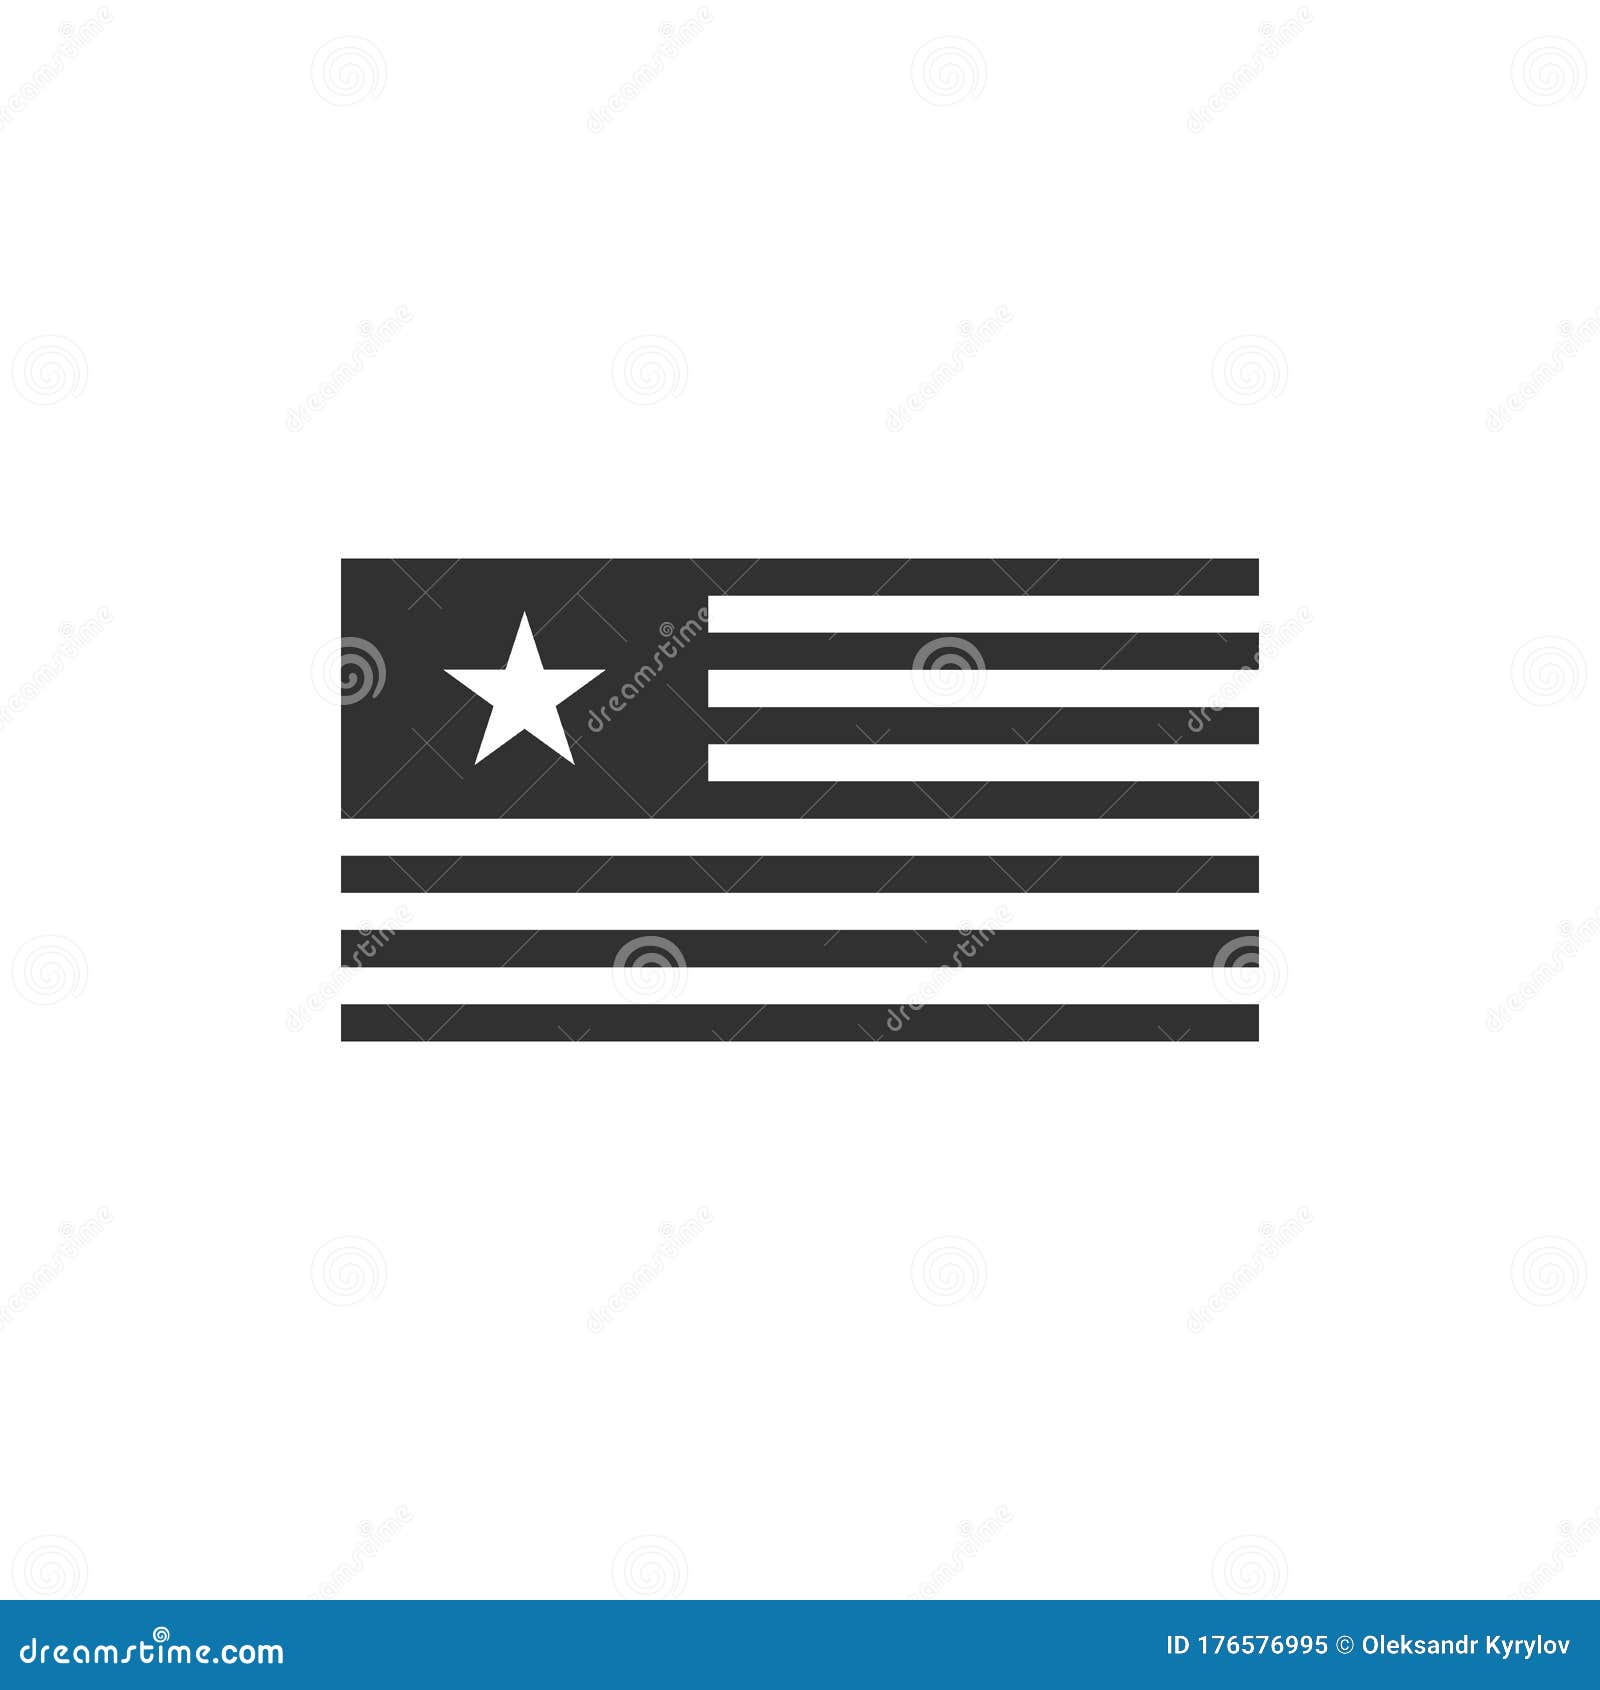 Albums 90+ Images what is the american flag with one star Sharp